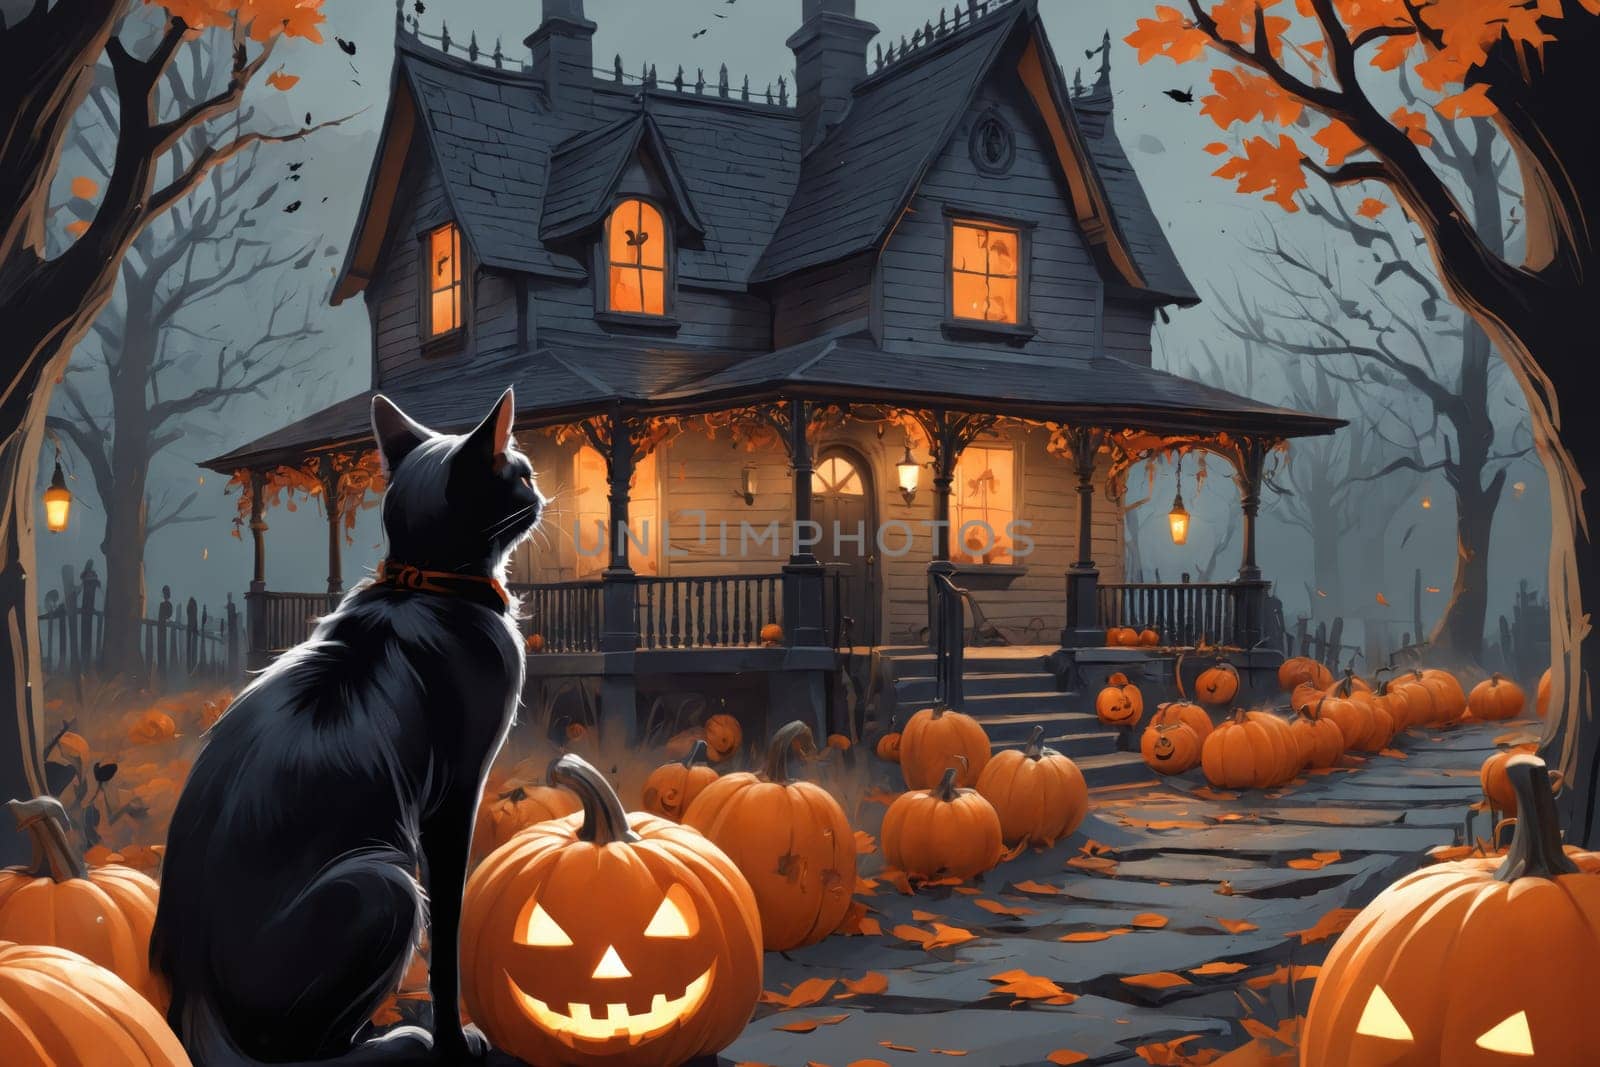 Settle into the spirit of Halloween with this image featuring a decorated house and a black cat. Perfect for use in holiday-themed content.